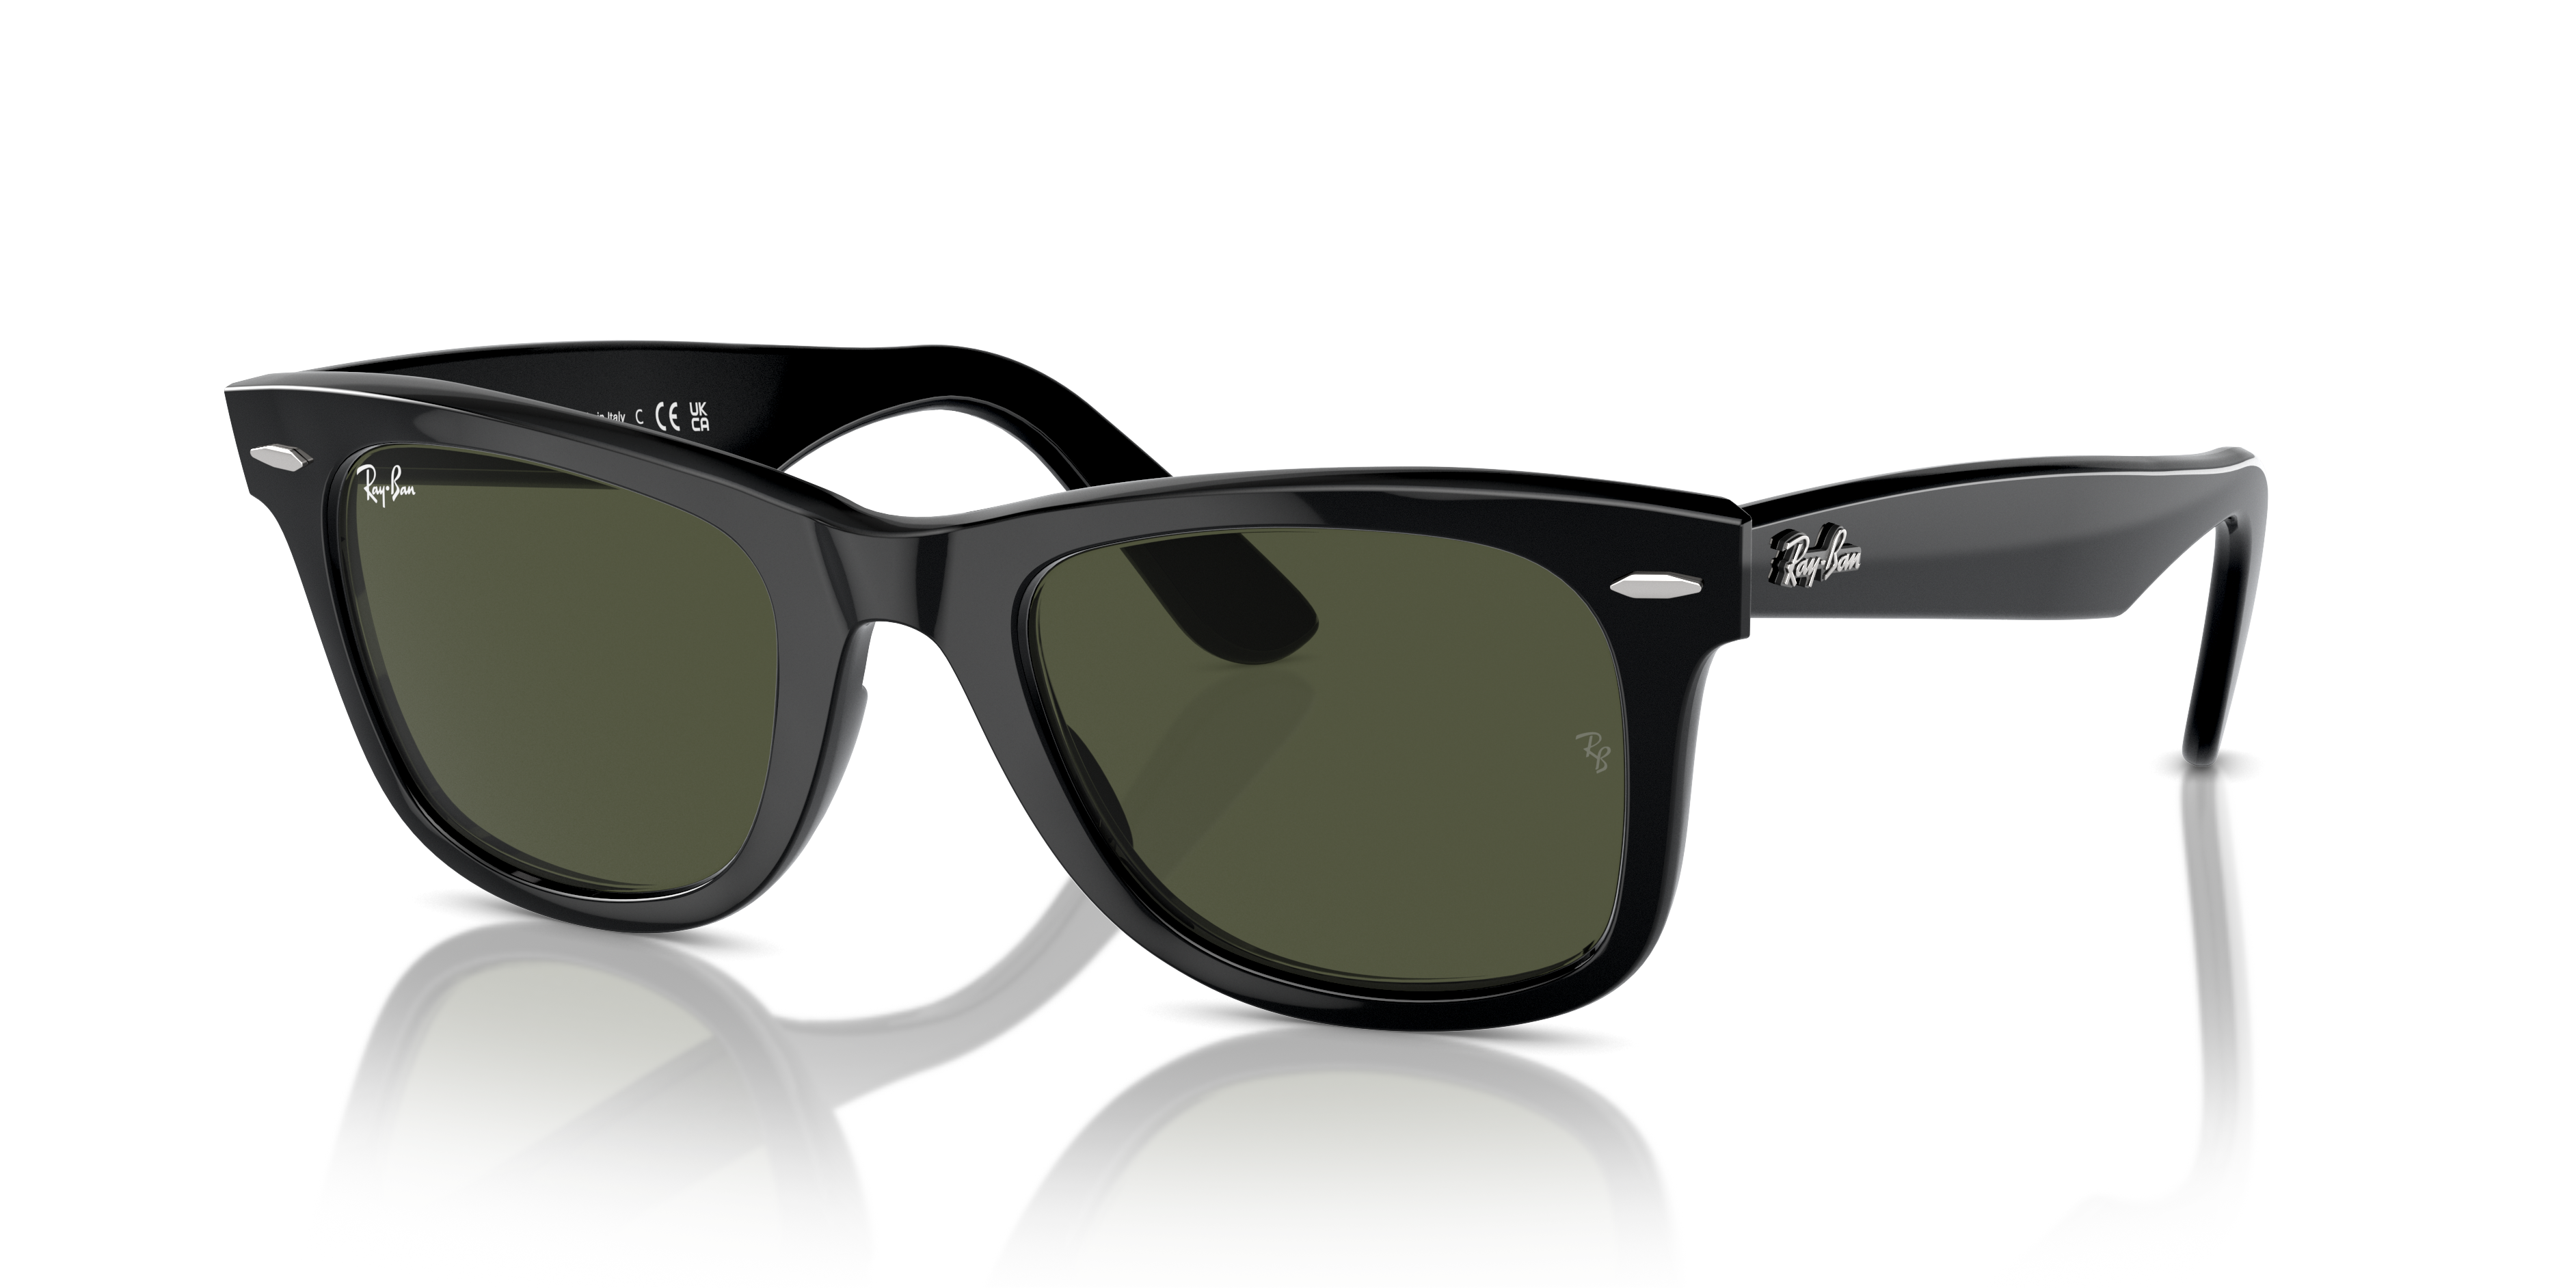 How I Made $8,873 In 31 Days Selling Sunglasses